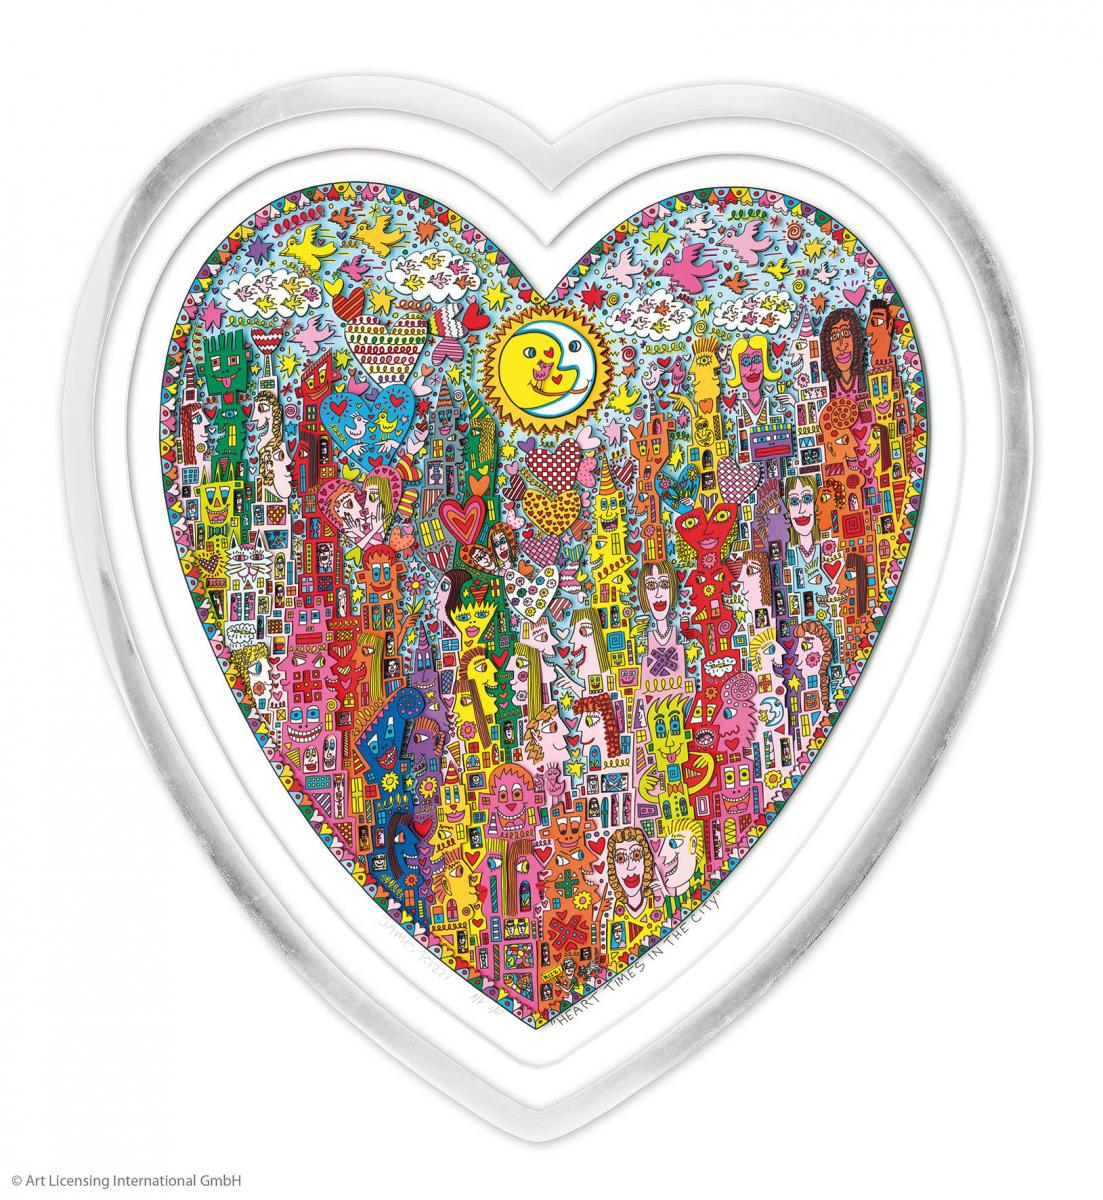 James Rizzi "Heart Times in the City"